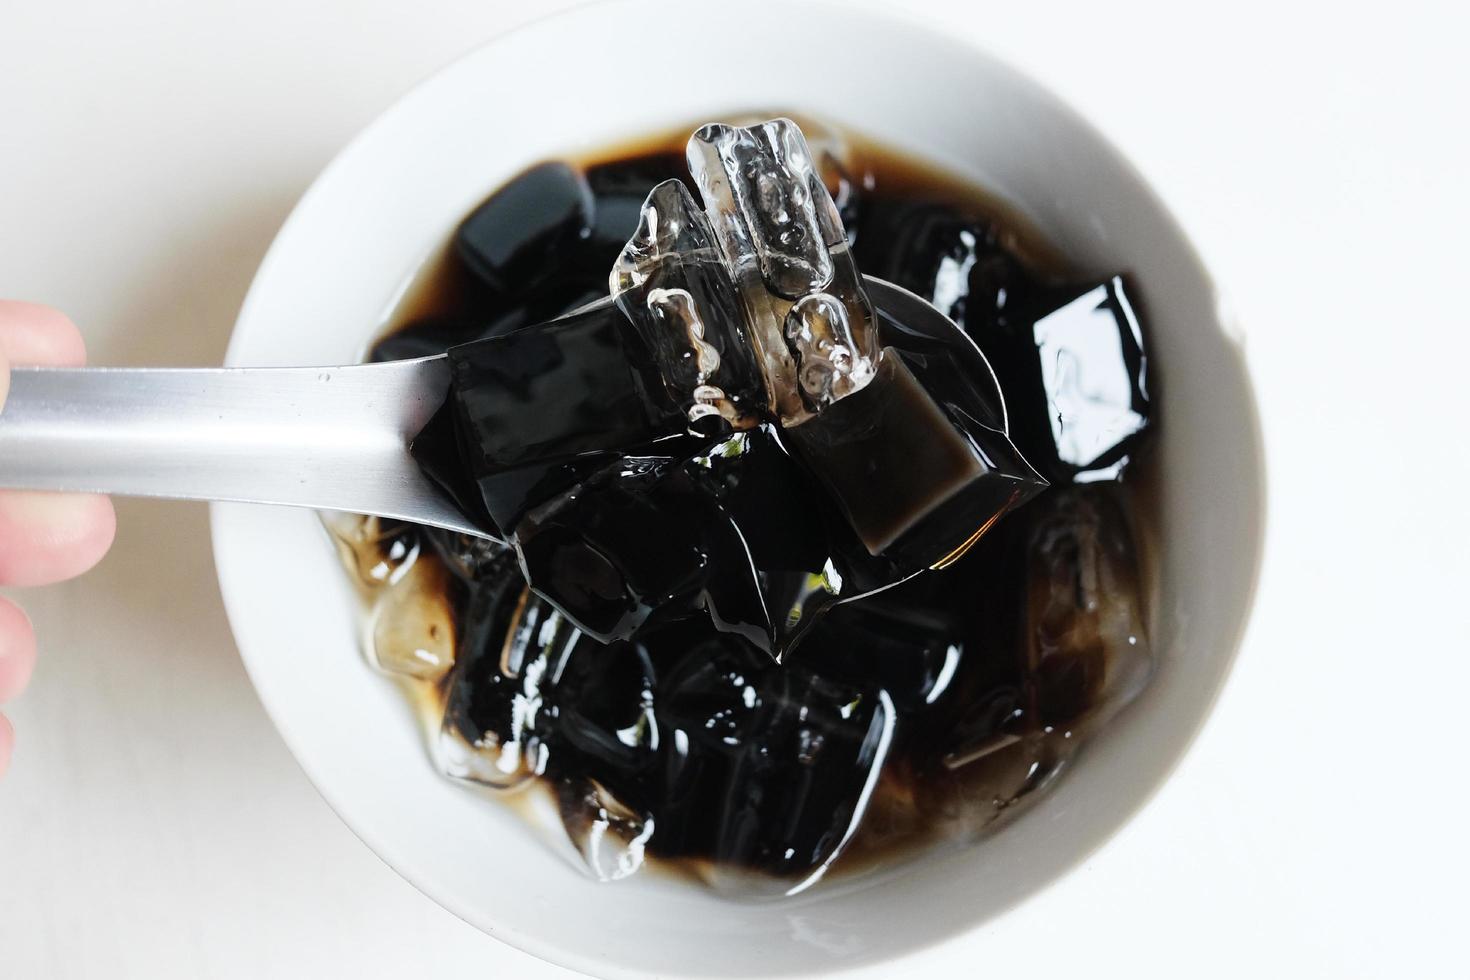 Thai Sweet dessert grass jelly with Ice in white bowl. A kind of Chinese vegetable is black jelly or Herbs can relieve heat in human body system and Aphthous stomatitis in summertime. photo